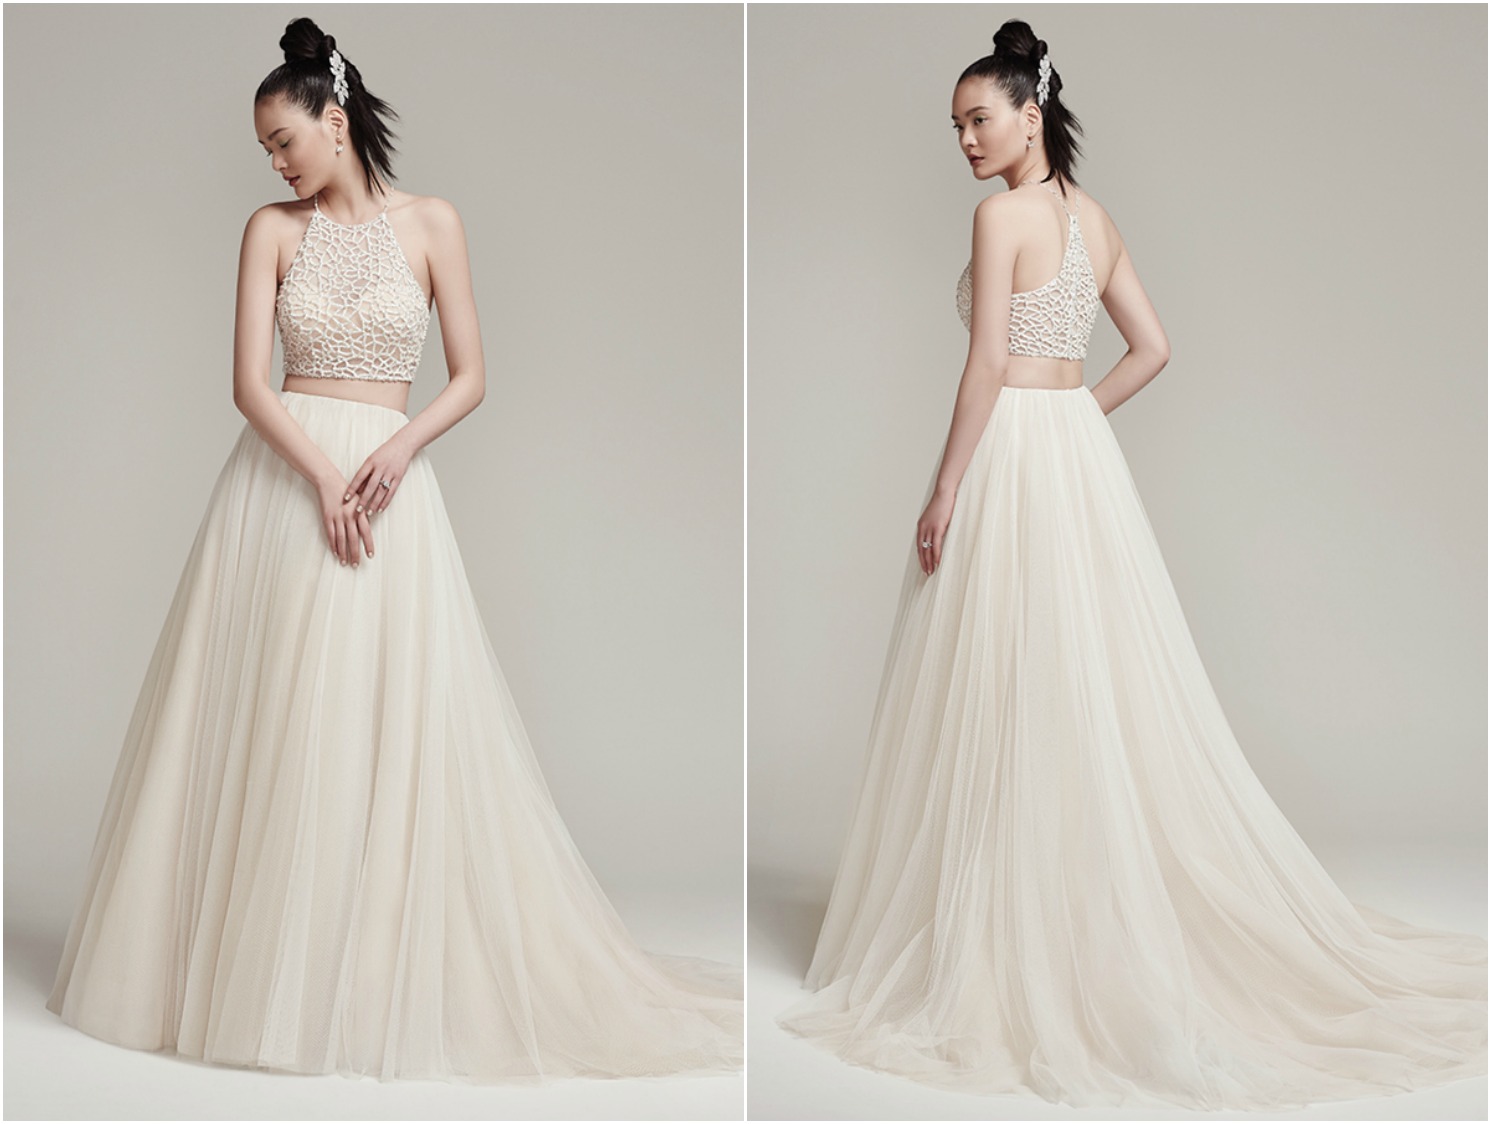 Sophisticated bead encrusted cropped halter with crystal button closure and bandeau lining. Full tulle A-line skirt with zipper closure.

<a href="https://www.maggiesottero.com/sottero-and-midgley/jude-shardea/9965" target="_blank">Sottero &amp; Midgley</a>